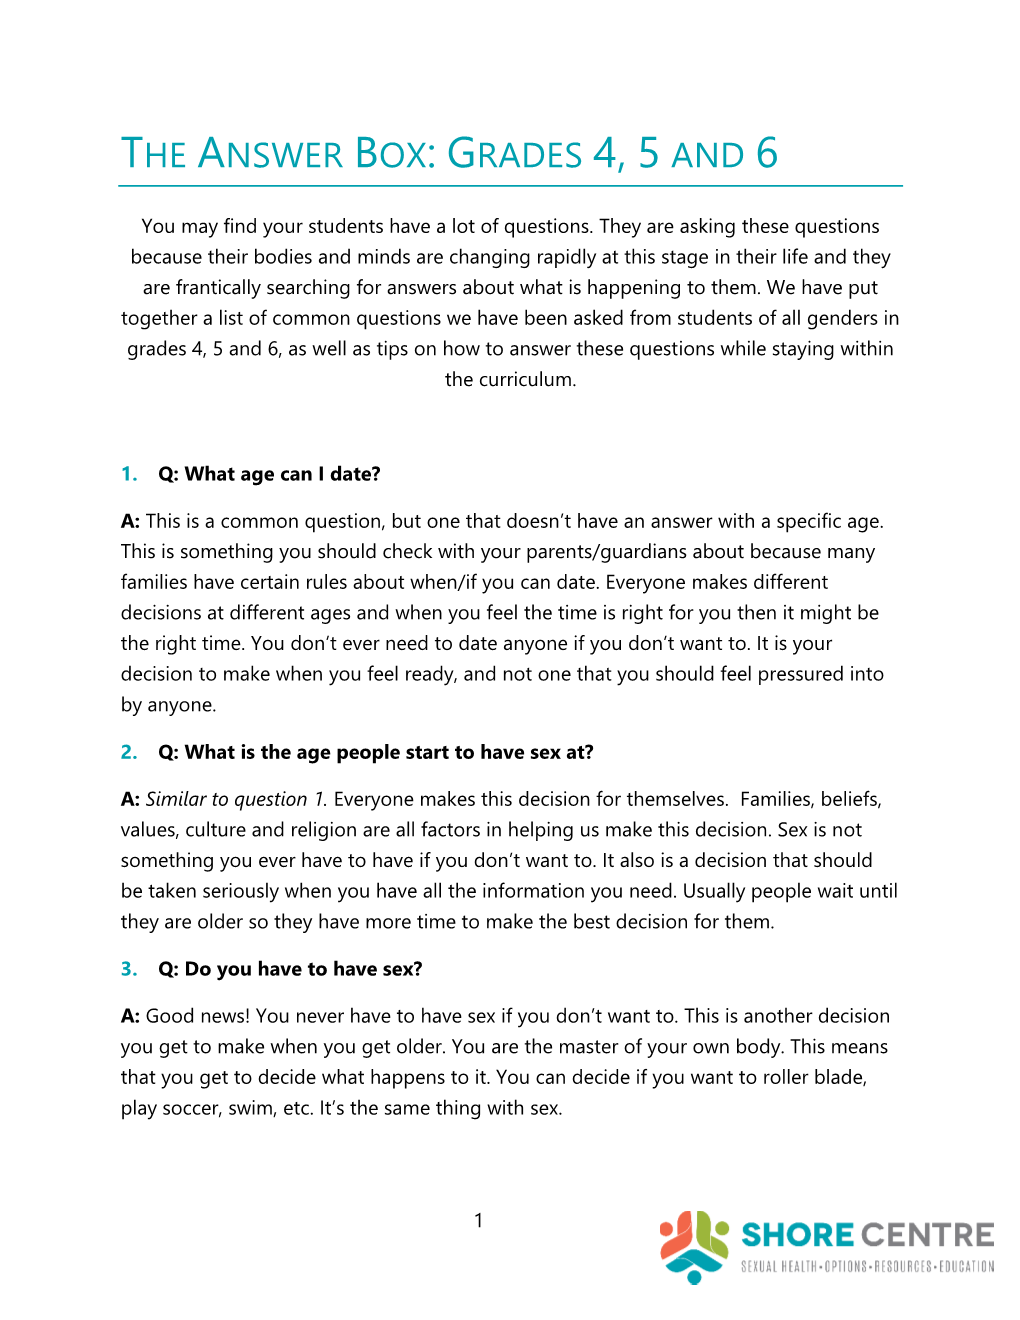 The Answer Box: Grades 4, 5 and 6